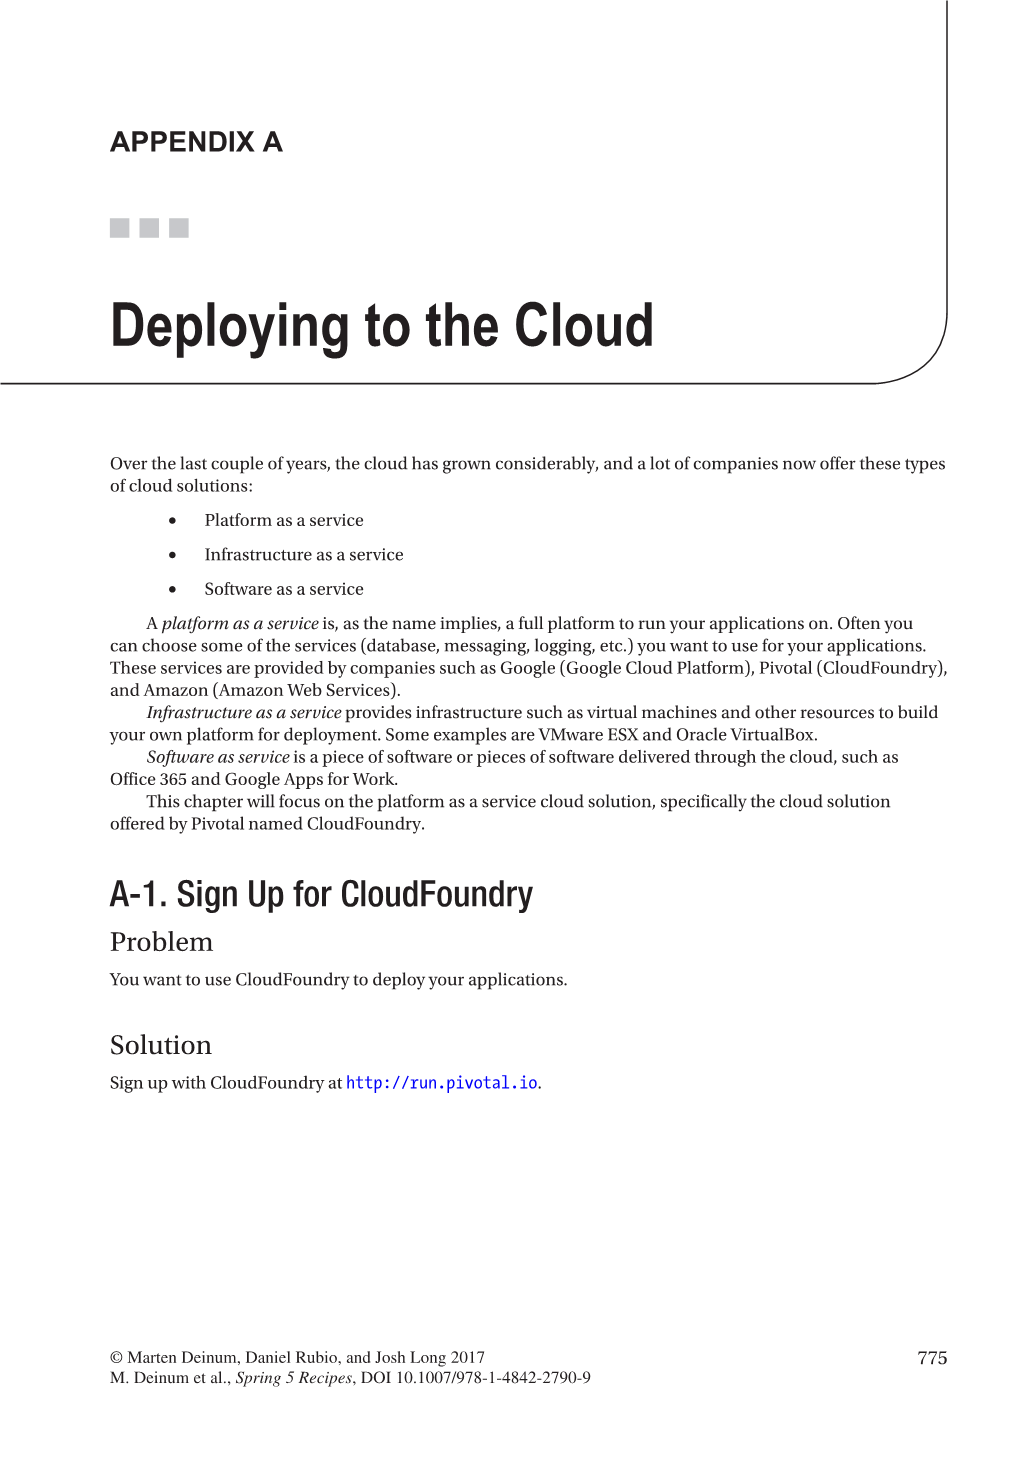 Deploying to the Cloud